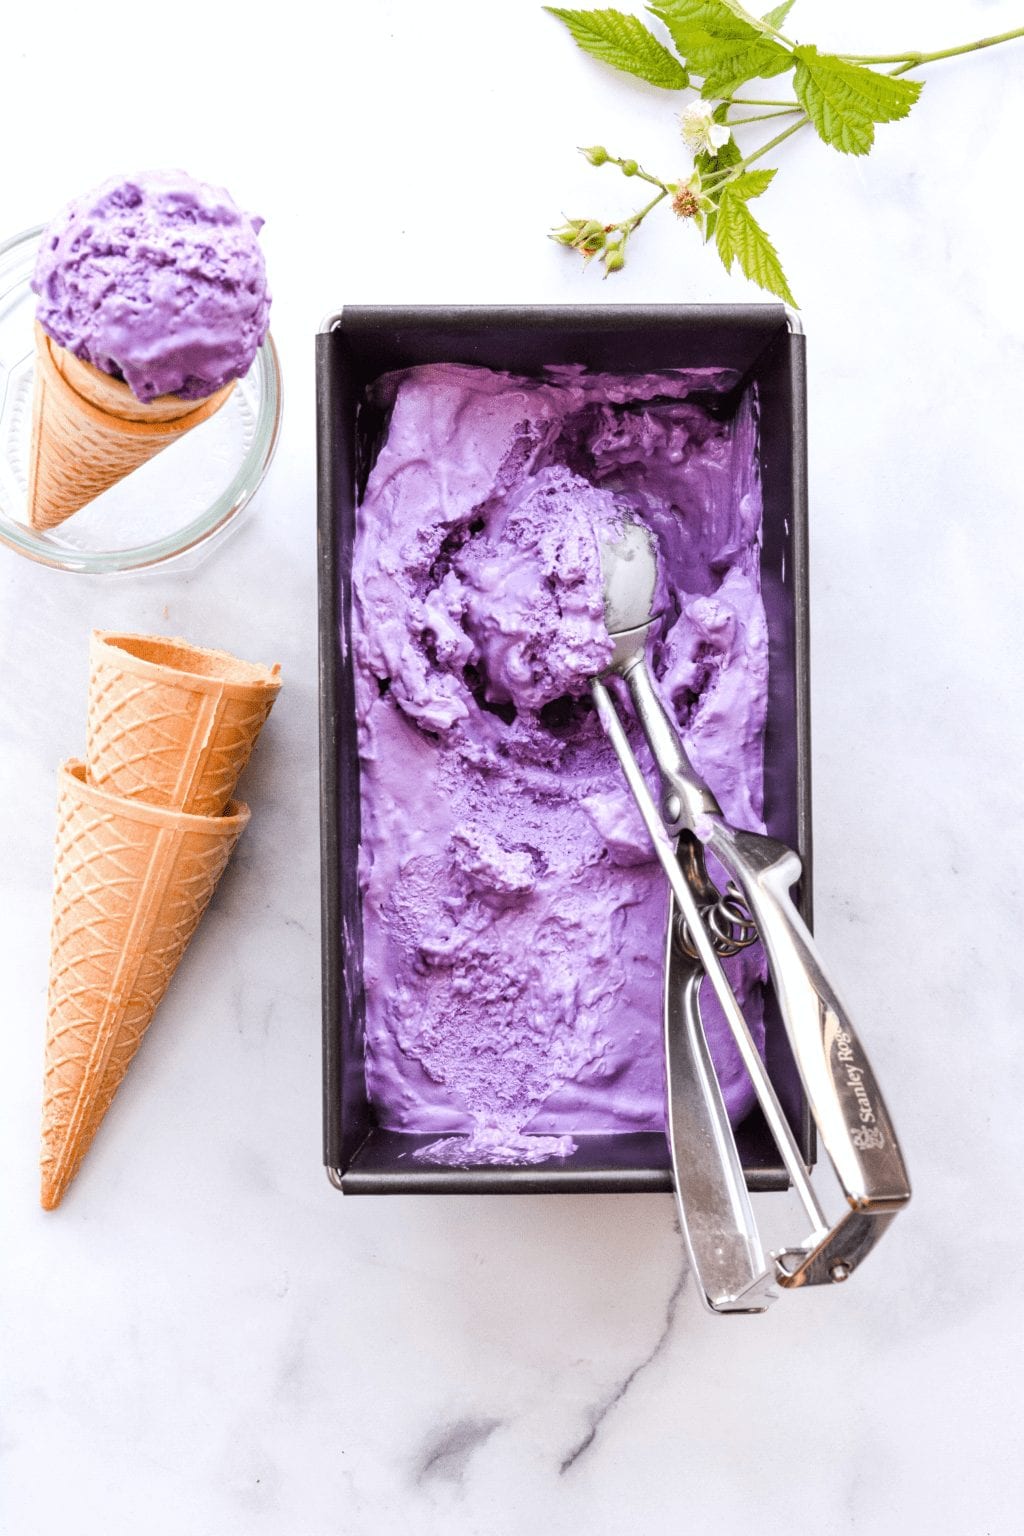 Ube ice cream from Dwell By Michelle.